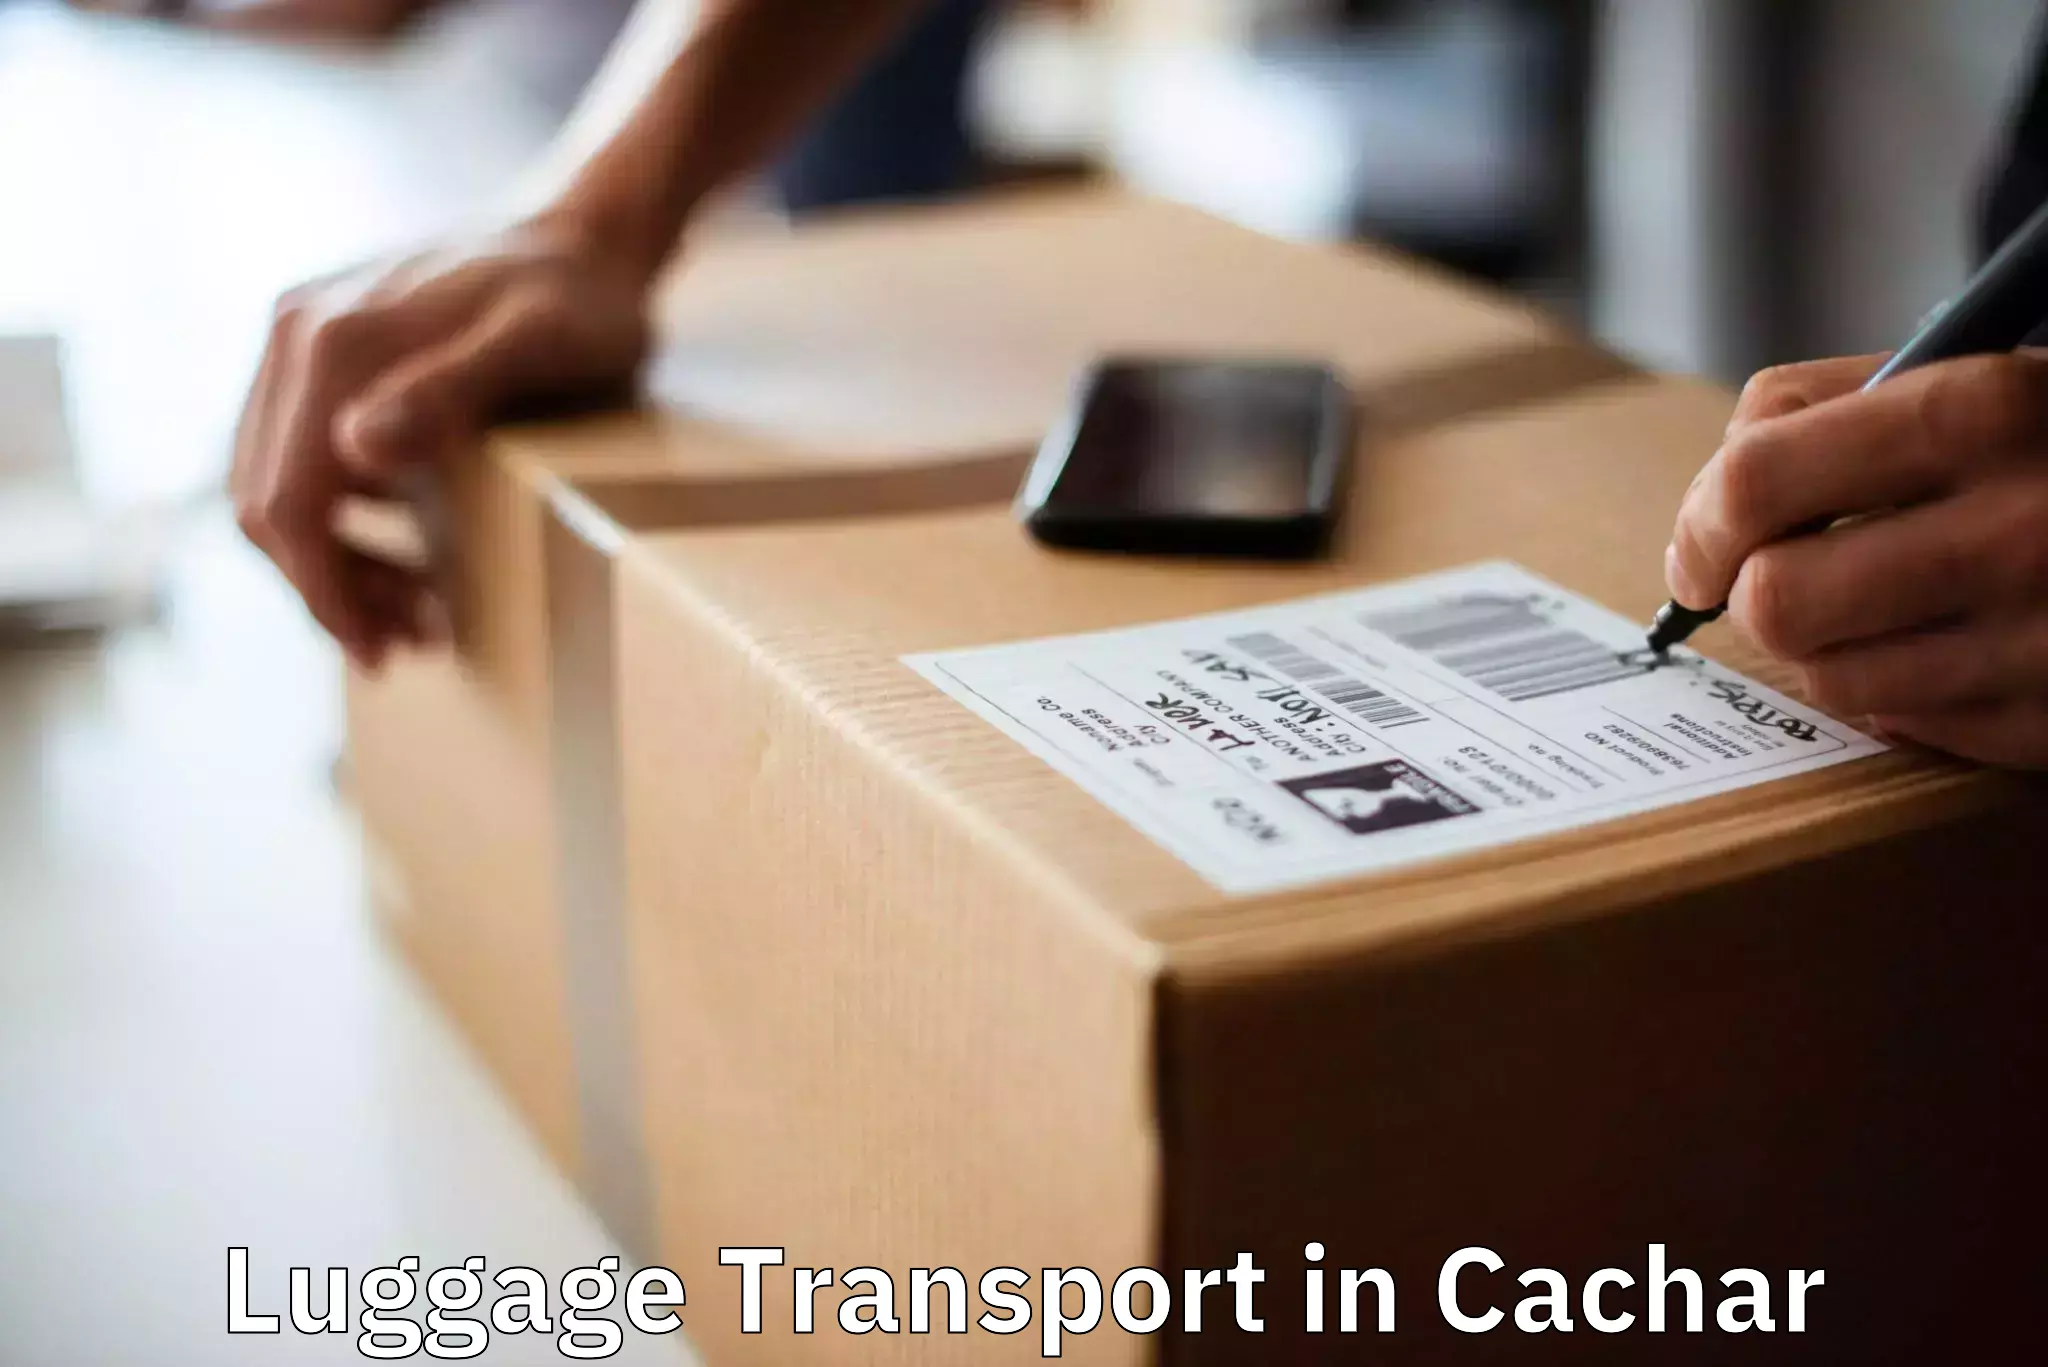 Luggage transport rates calculator in Cachar